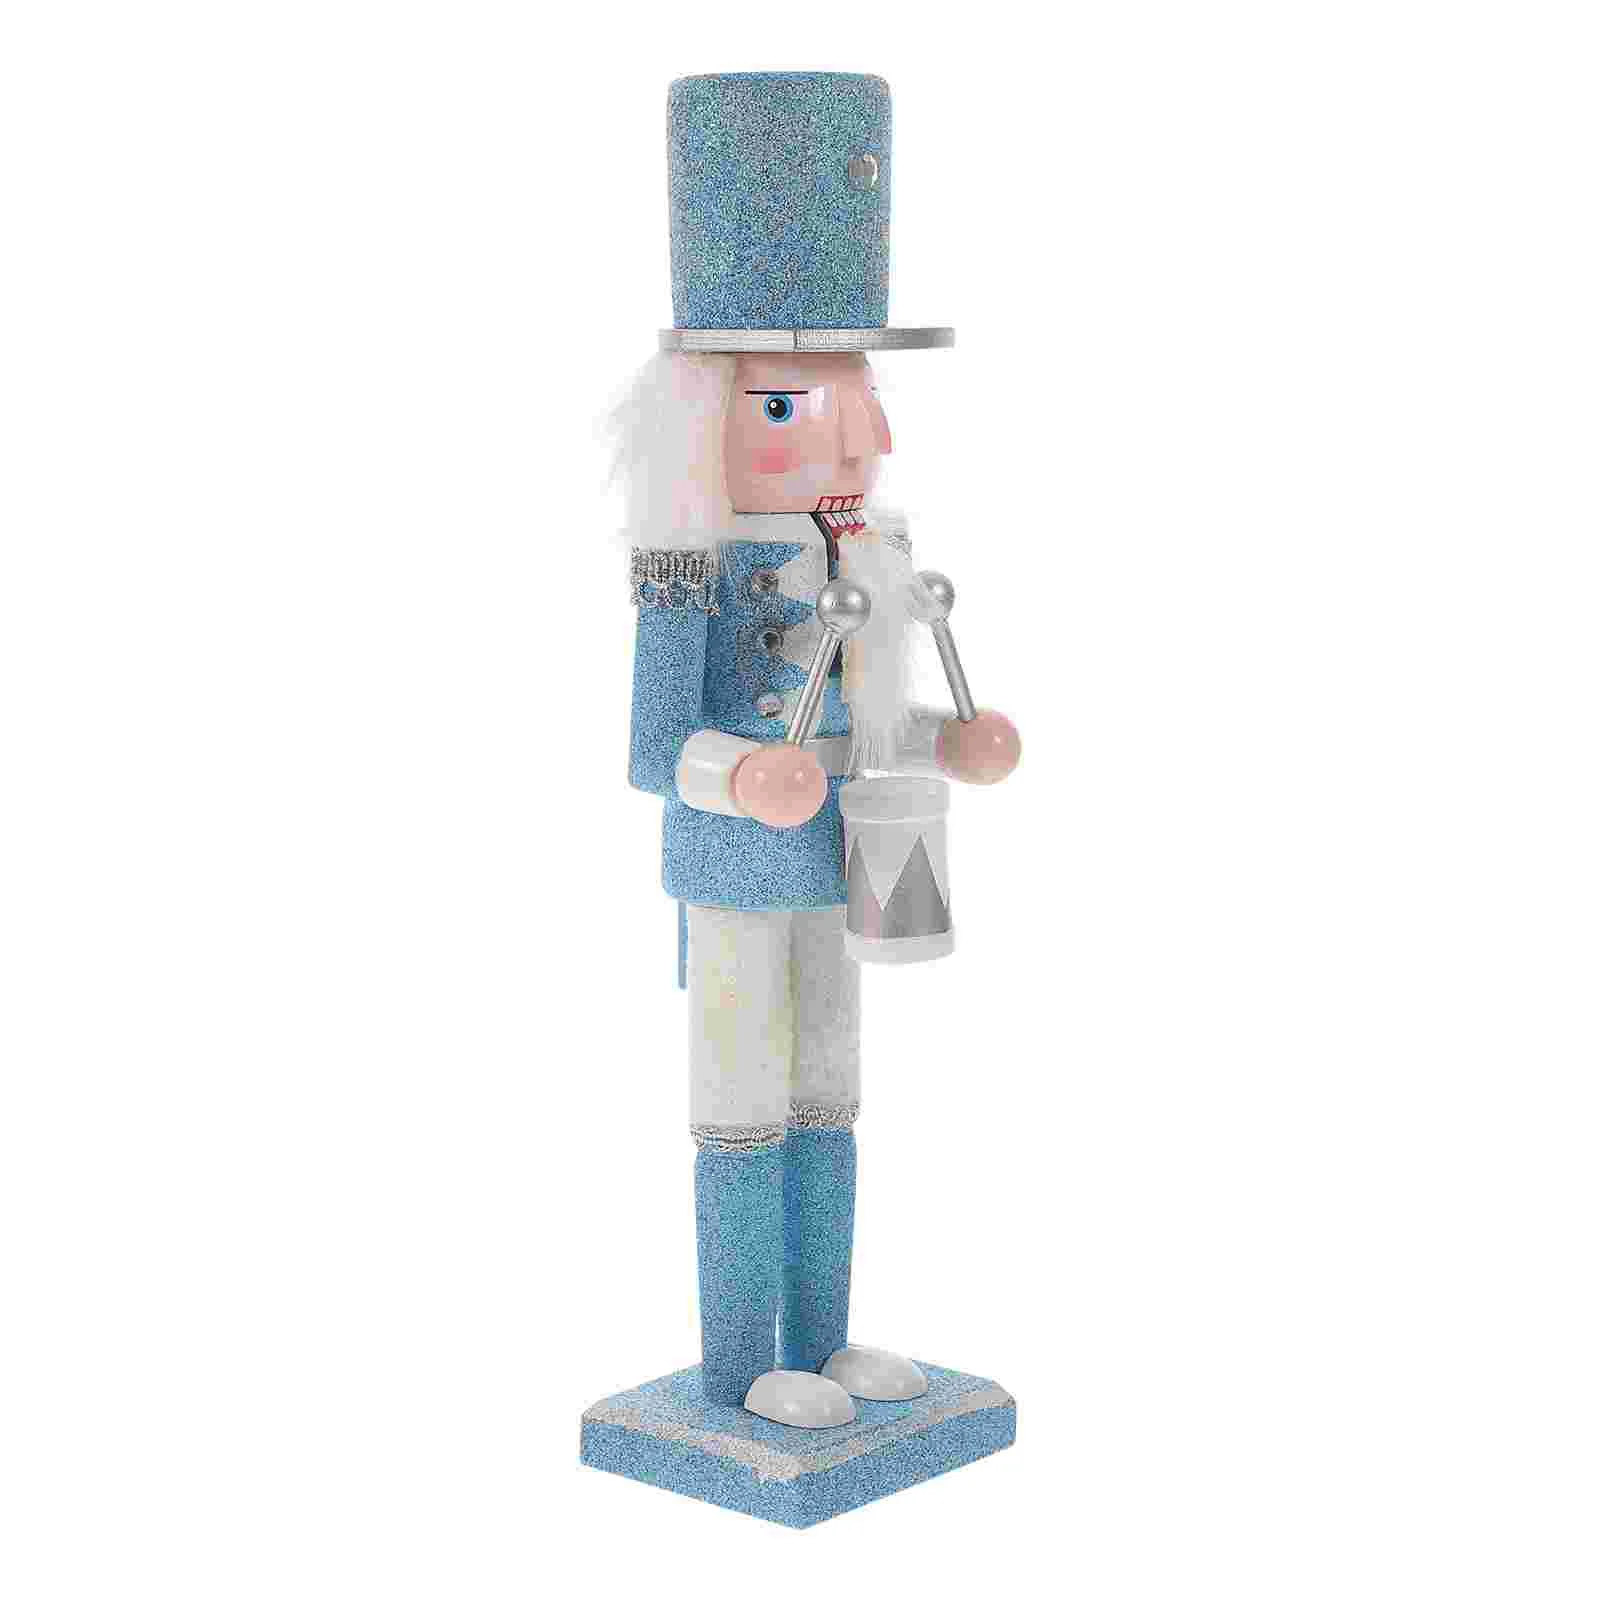 

Uncle Sam Figurine Nutcracker Ornament Outdoor Gifts Nutcrackers Christmas Decorations